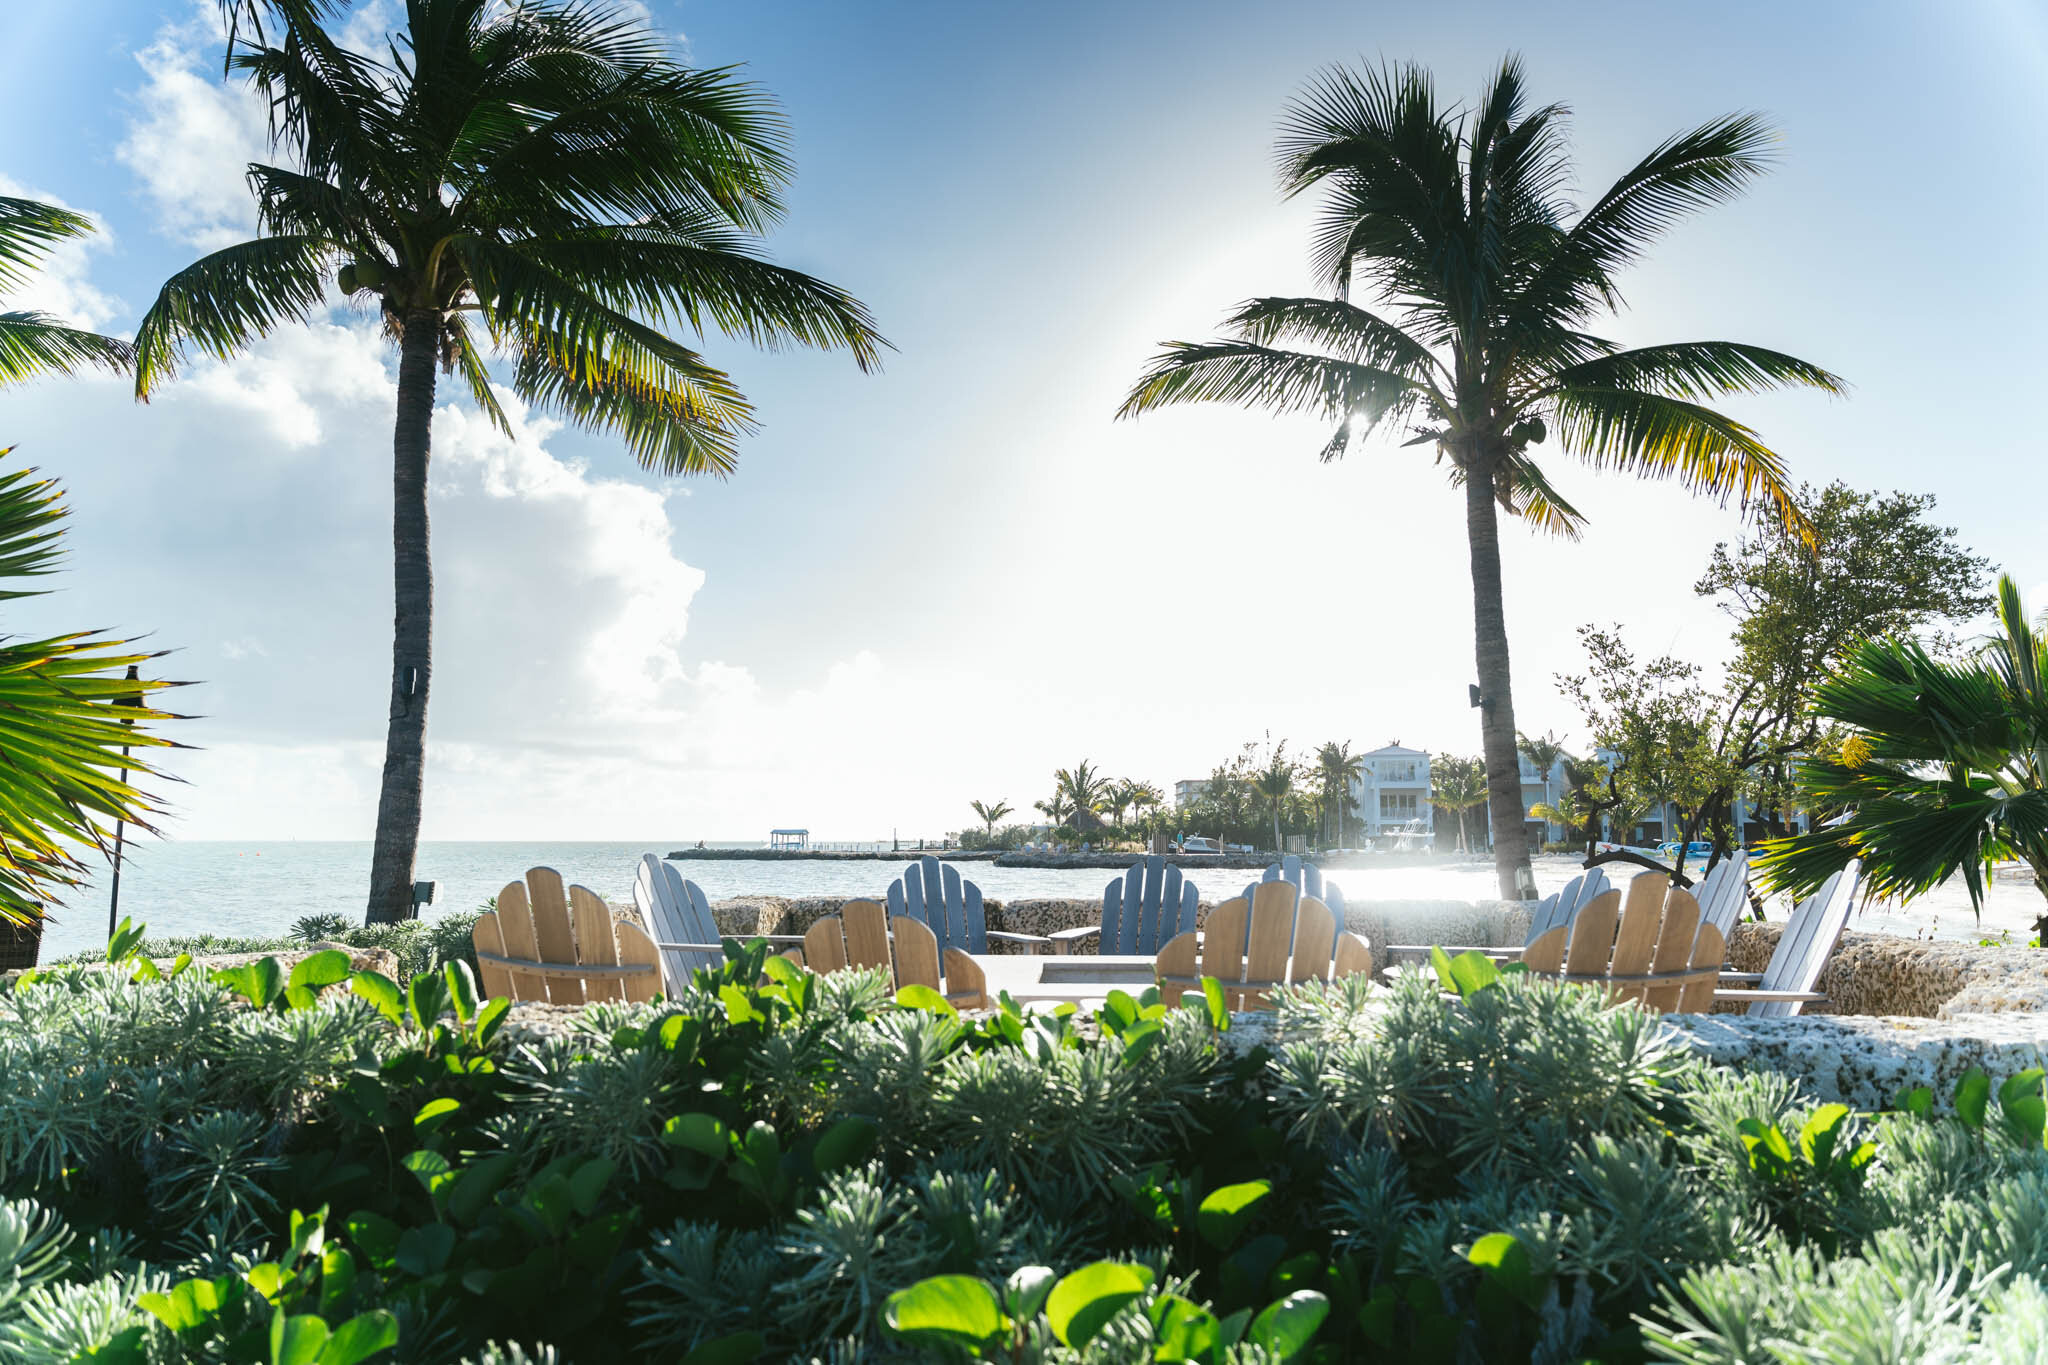  Palm trees surround The Islands of Islamorada’s beachside fire pit as the sun shines over the Atlantic Ocean in the background. 